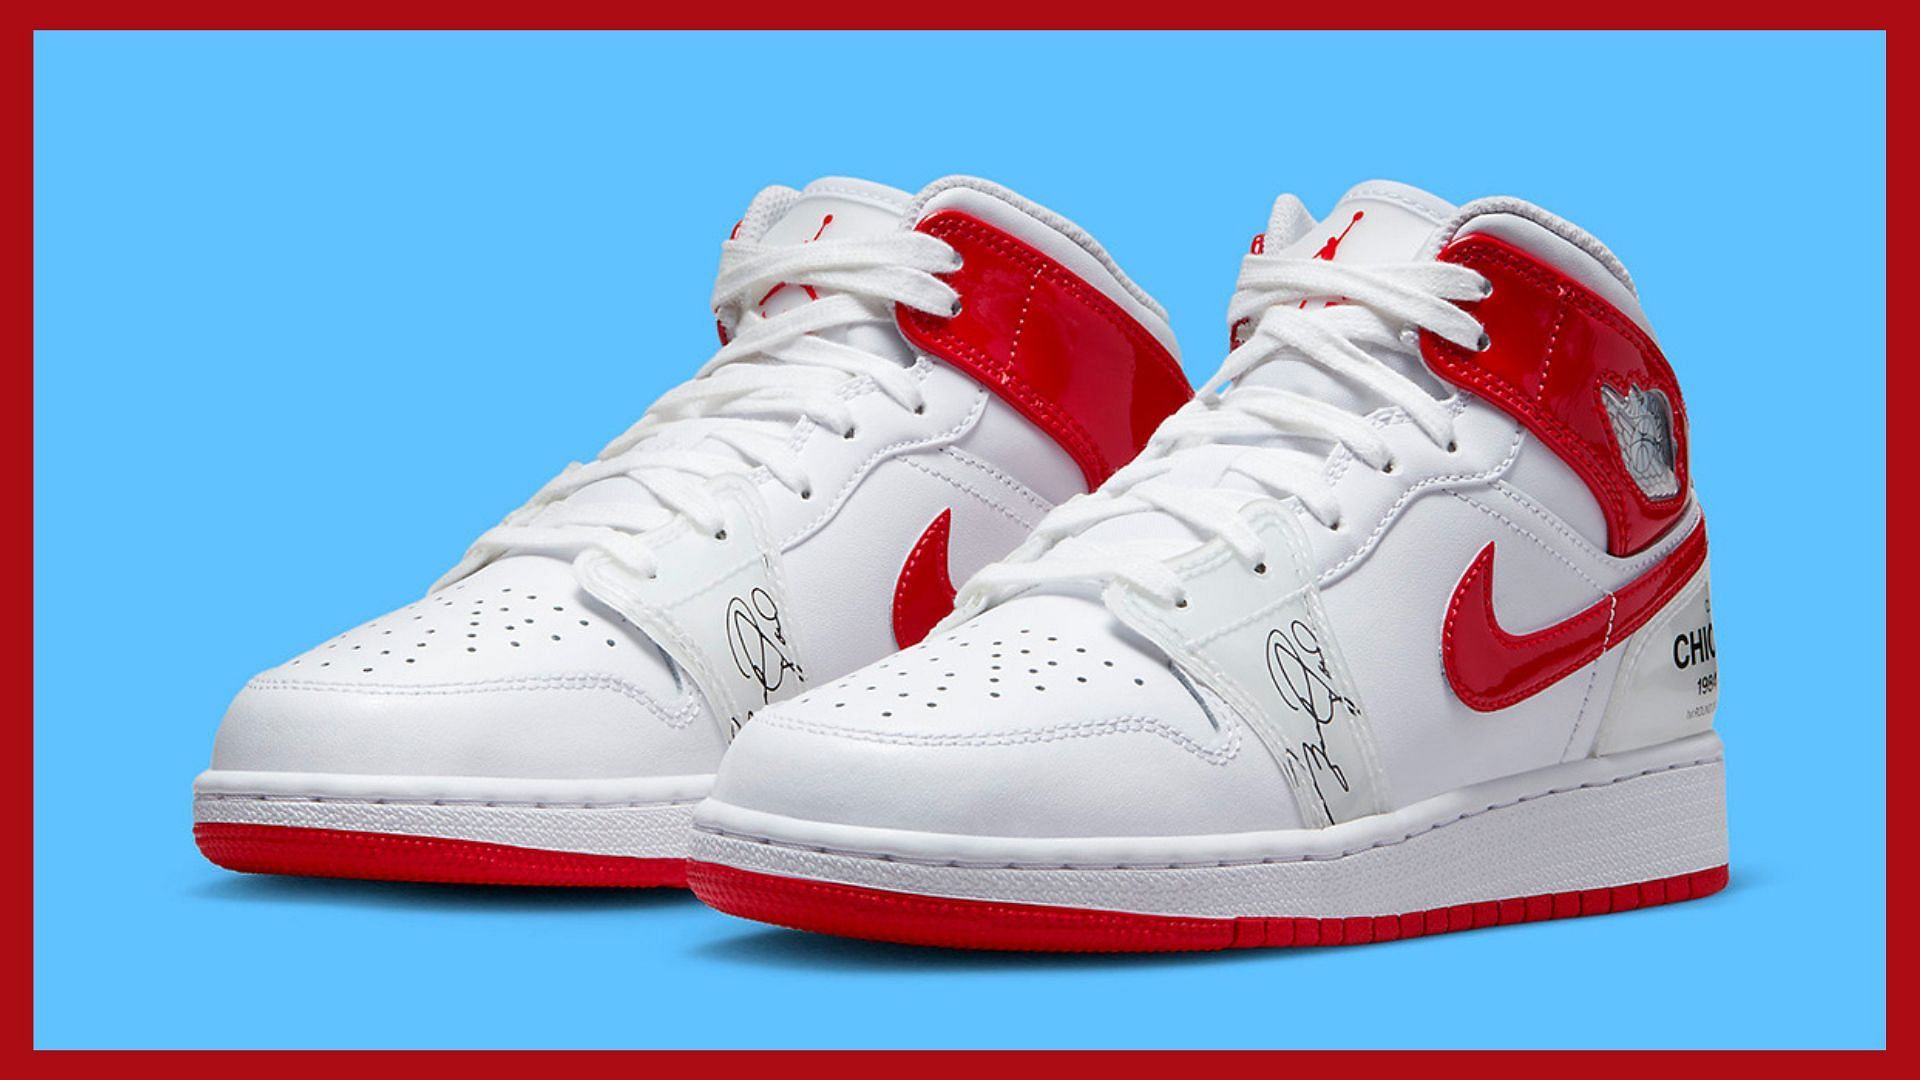 Where to buy Air Jordan 1 Mid “Rookie Season” shoes? Price and more ...